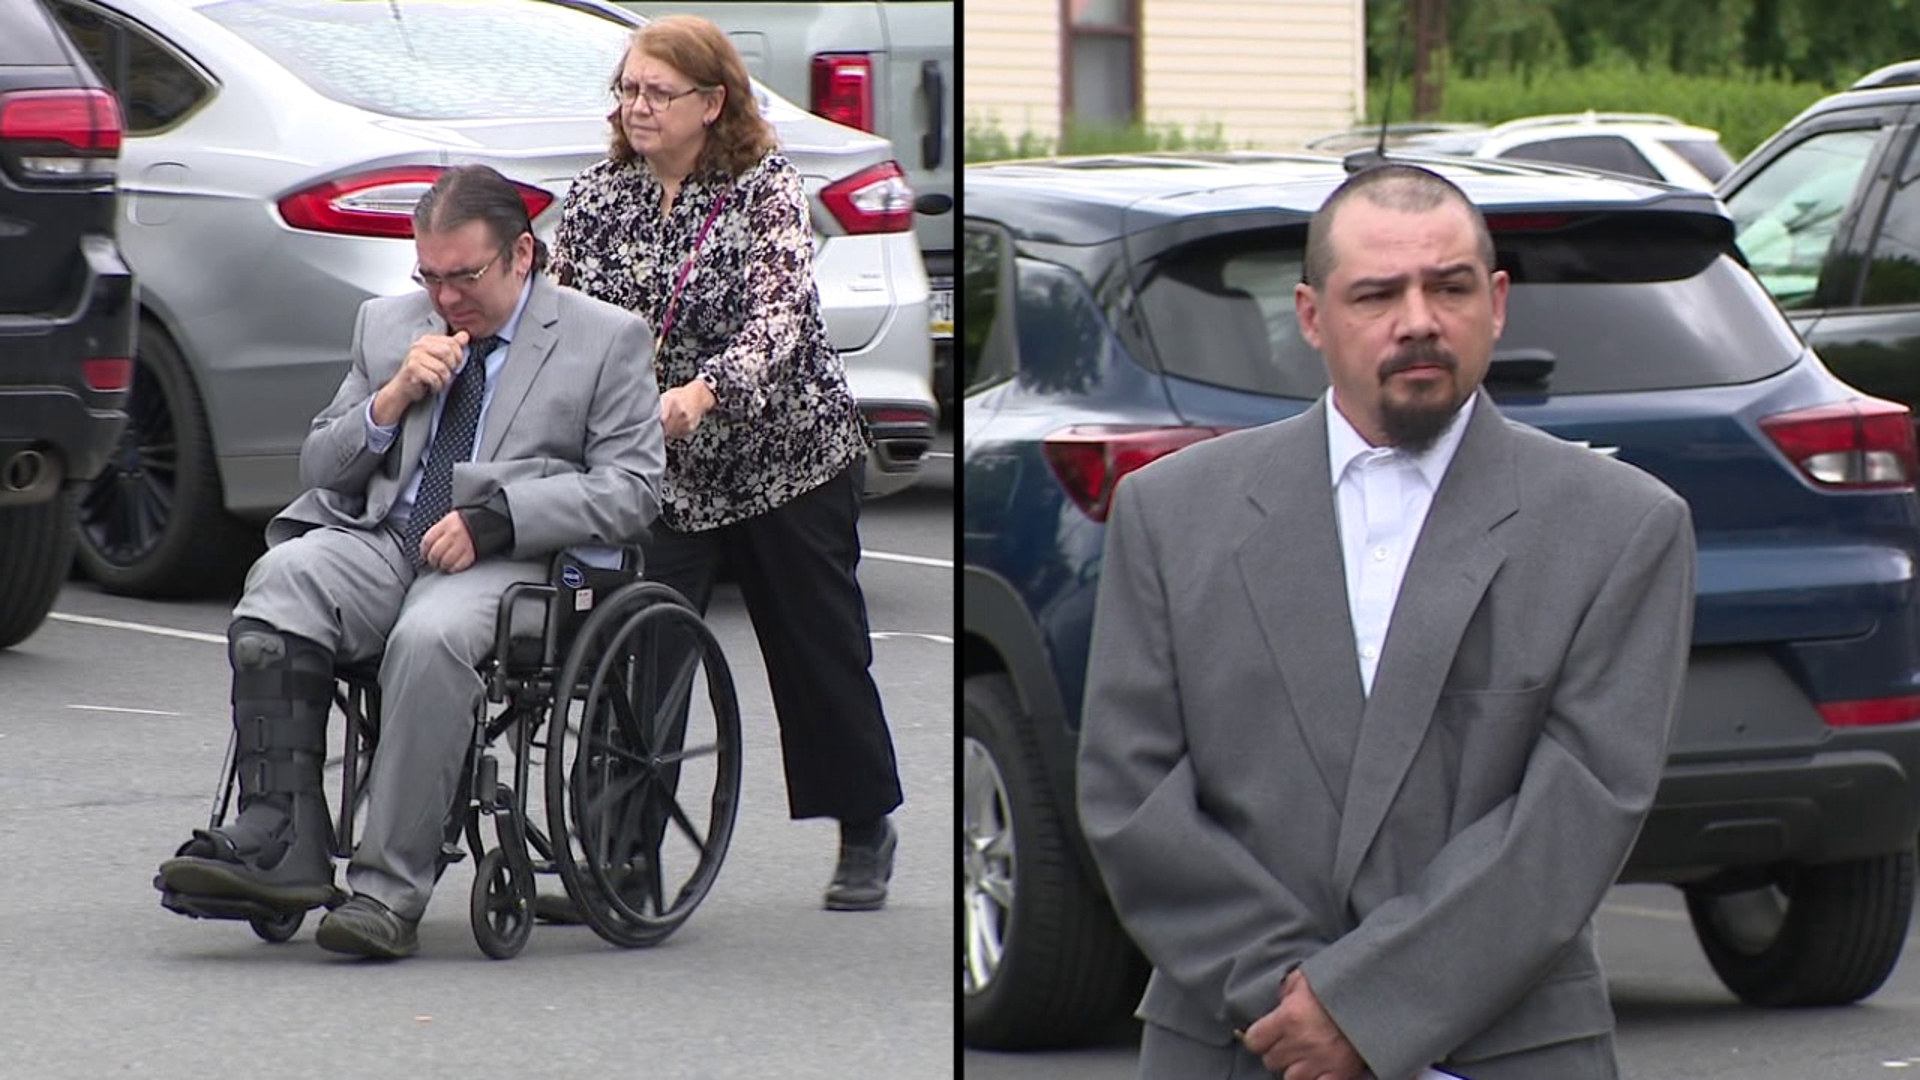 John Darko and Paul Viscomi face homicide charges for their roles in the wreck that killed Brian Nardella along Keyser Avenue back in March.